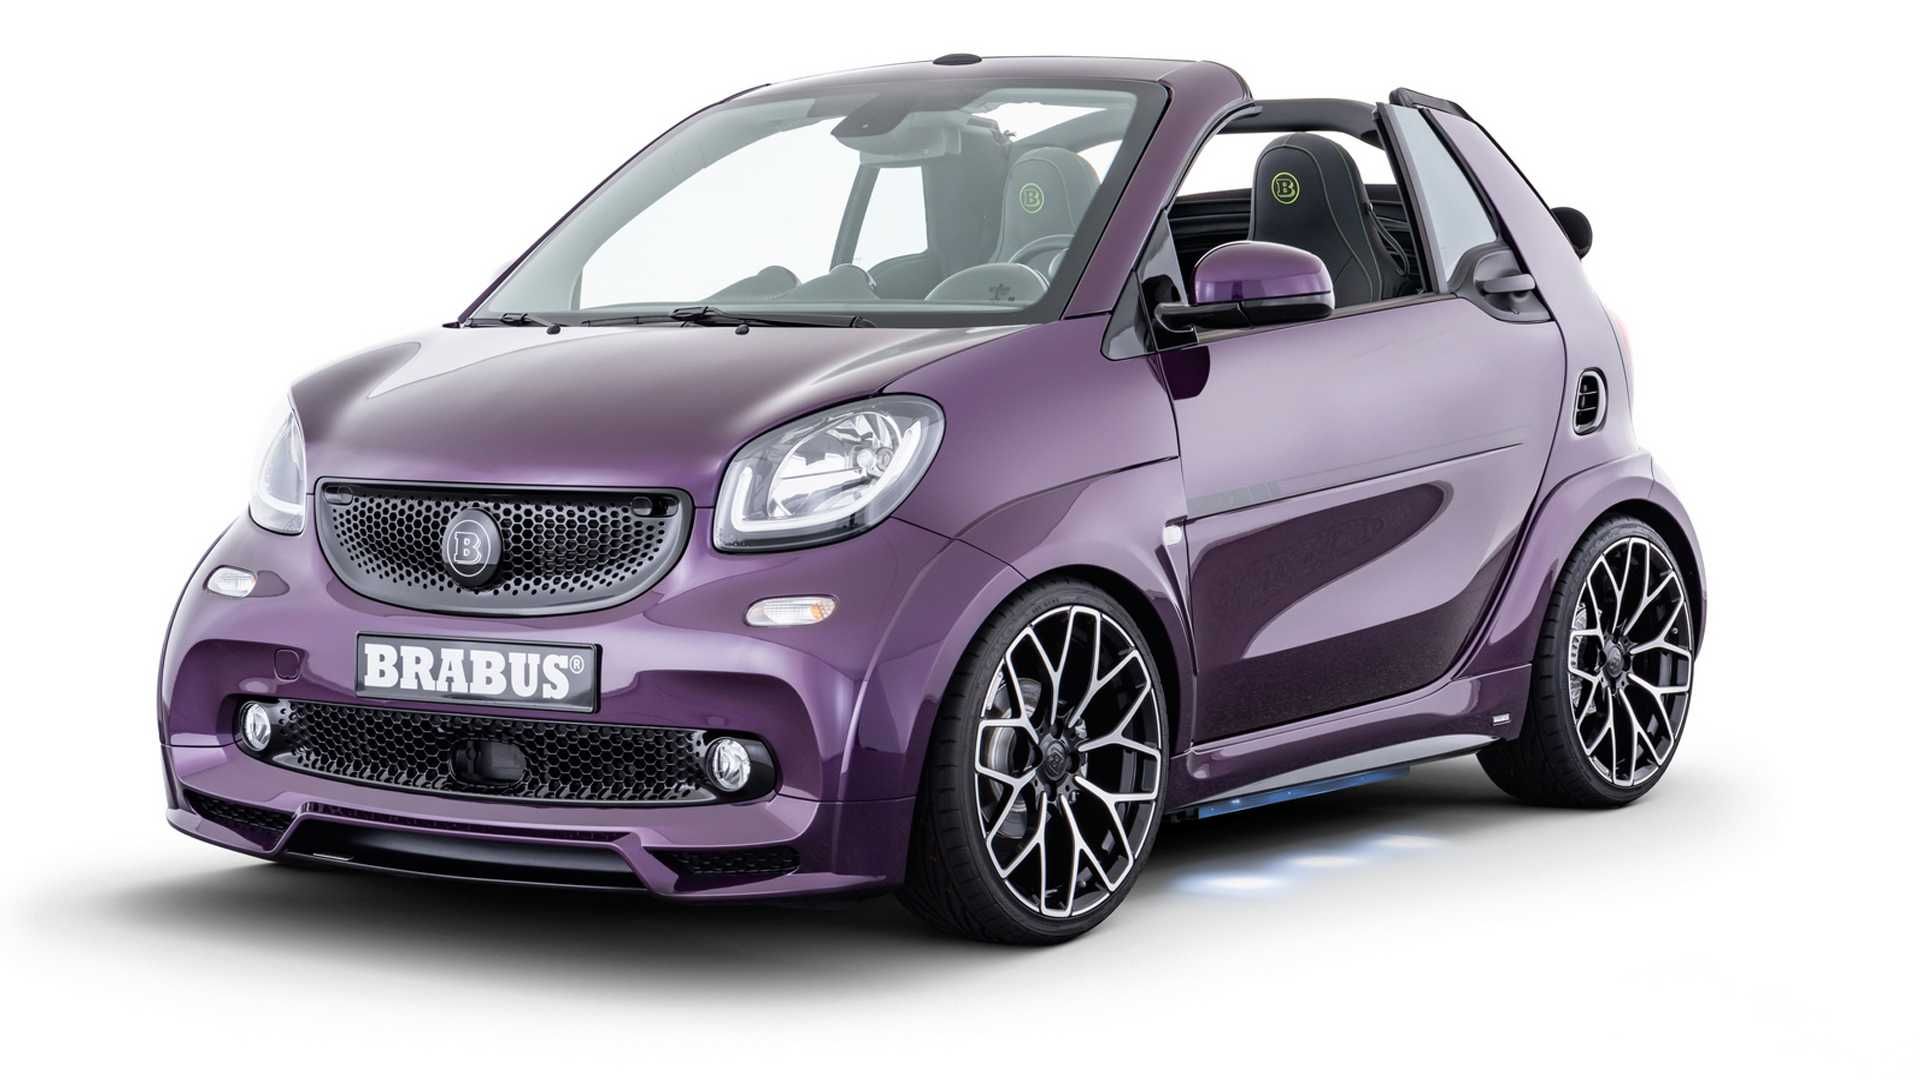 Brabus Smart fortwo (2005) - pictures, information & specs